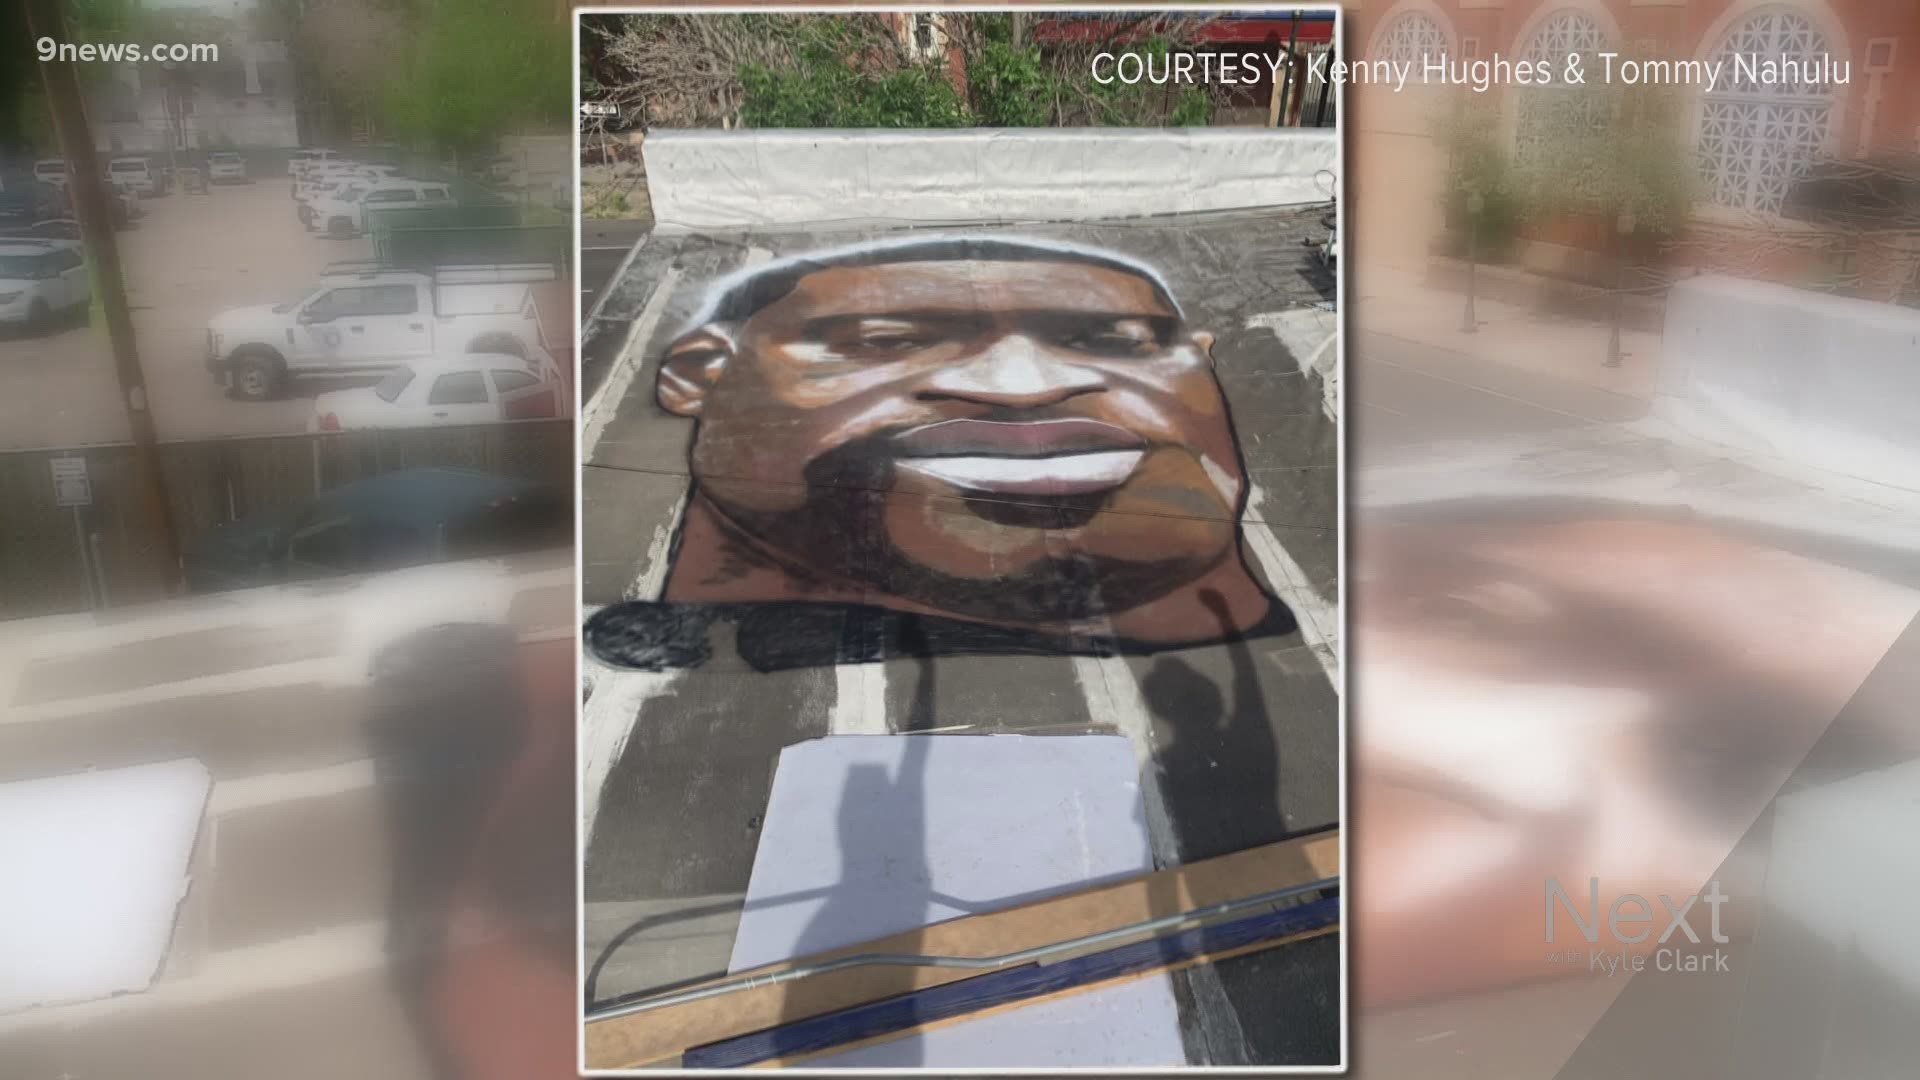 Kenny Hughes and Tommy Nahulu collaborated on a portrait of Floyd after watching their area of Colfax turn violent over the weekend.